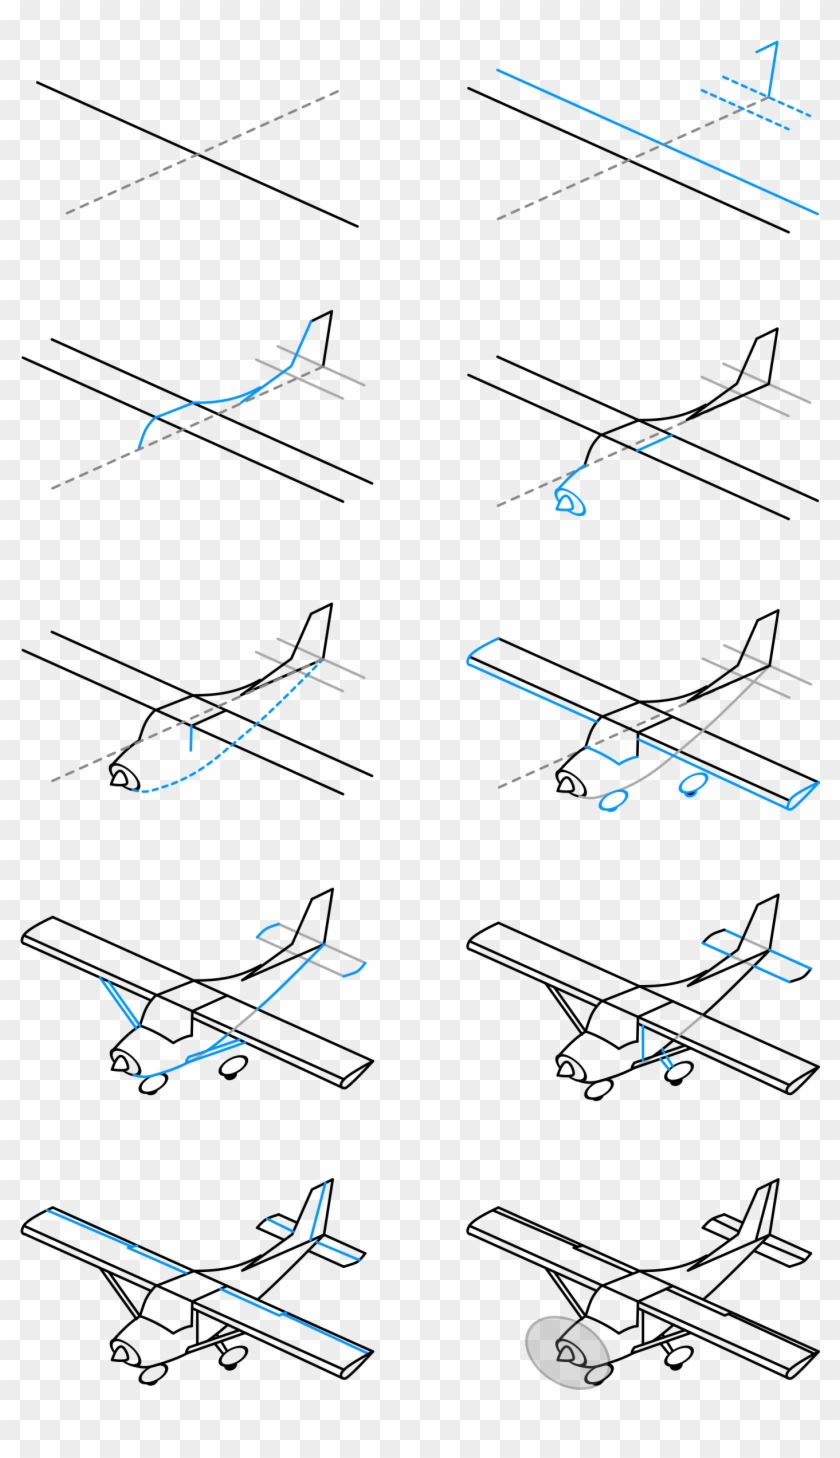 This Free Icons Png Design Of Draw A Single Engine Clipart #2292025